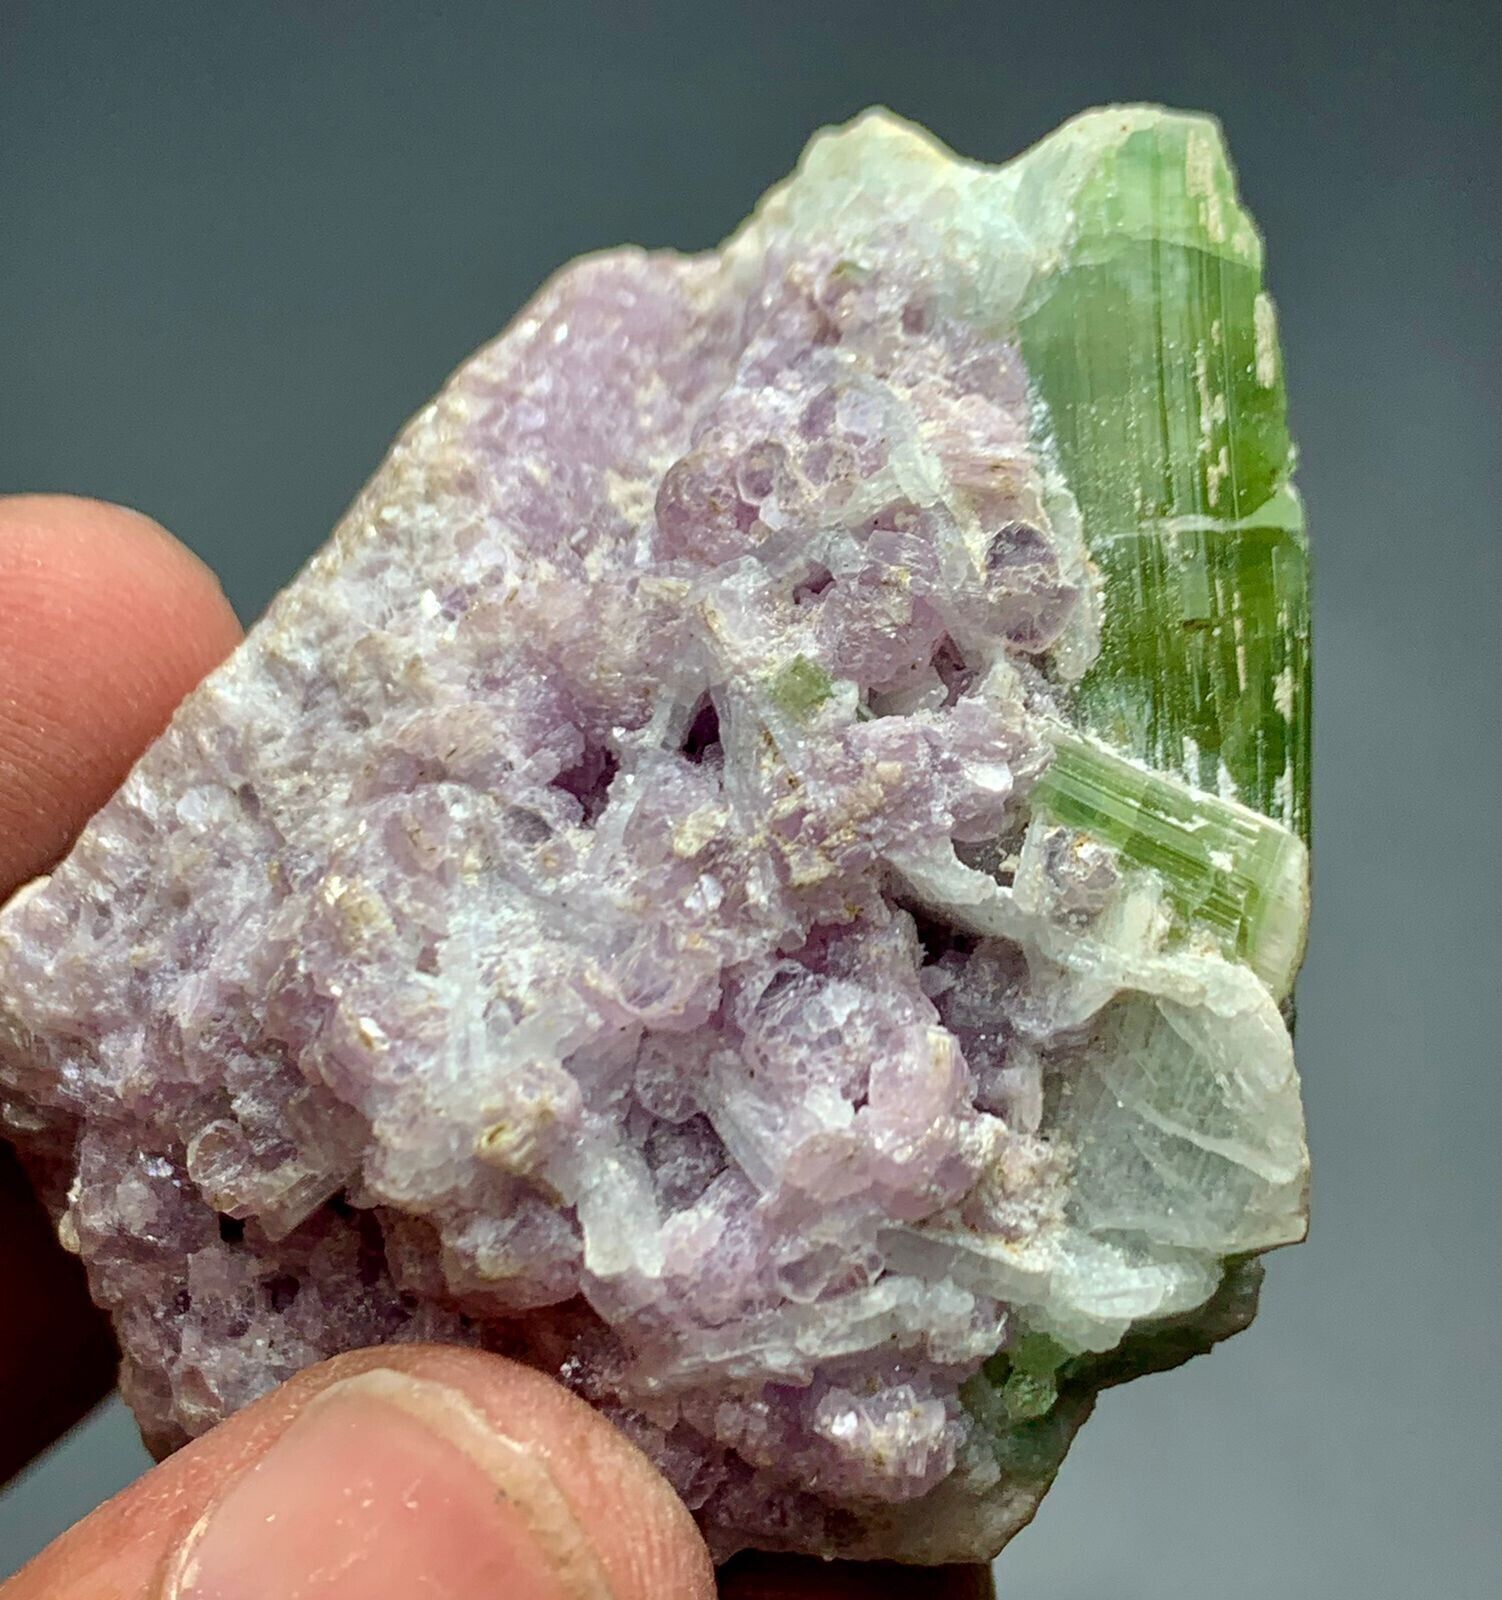 248 Cts beautiful terminated tourmaline crystal with lepidolite specimen @afg